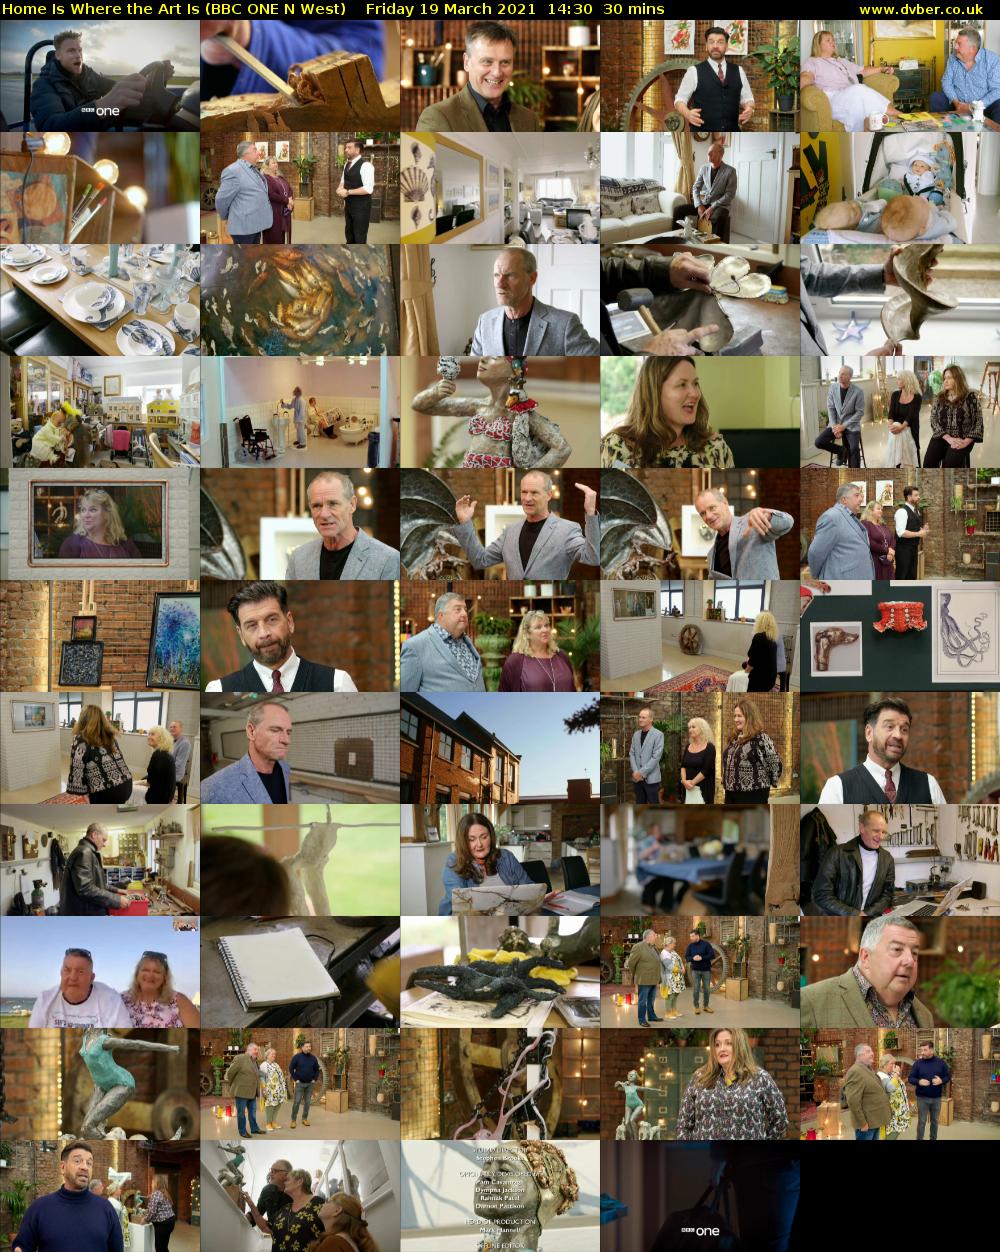 Home Is Where the Art Is (BBC ONE N West) Friday 19 March 2021 14:30 - 15:00